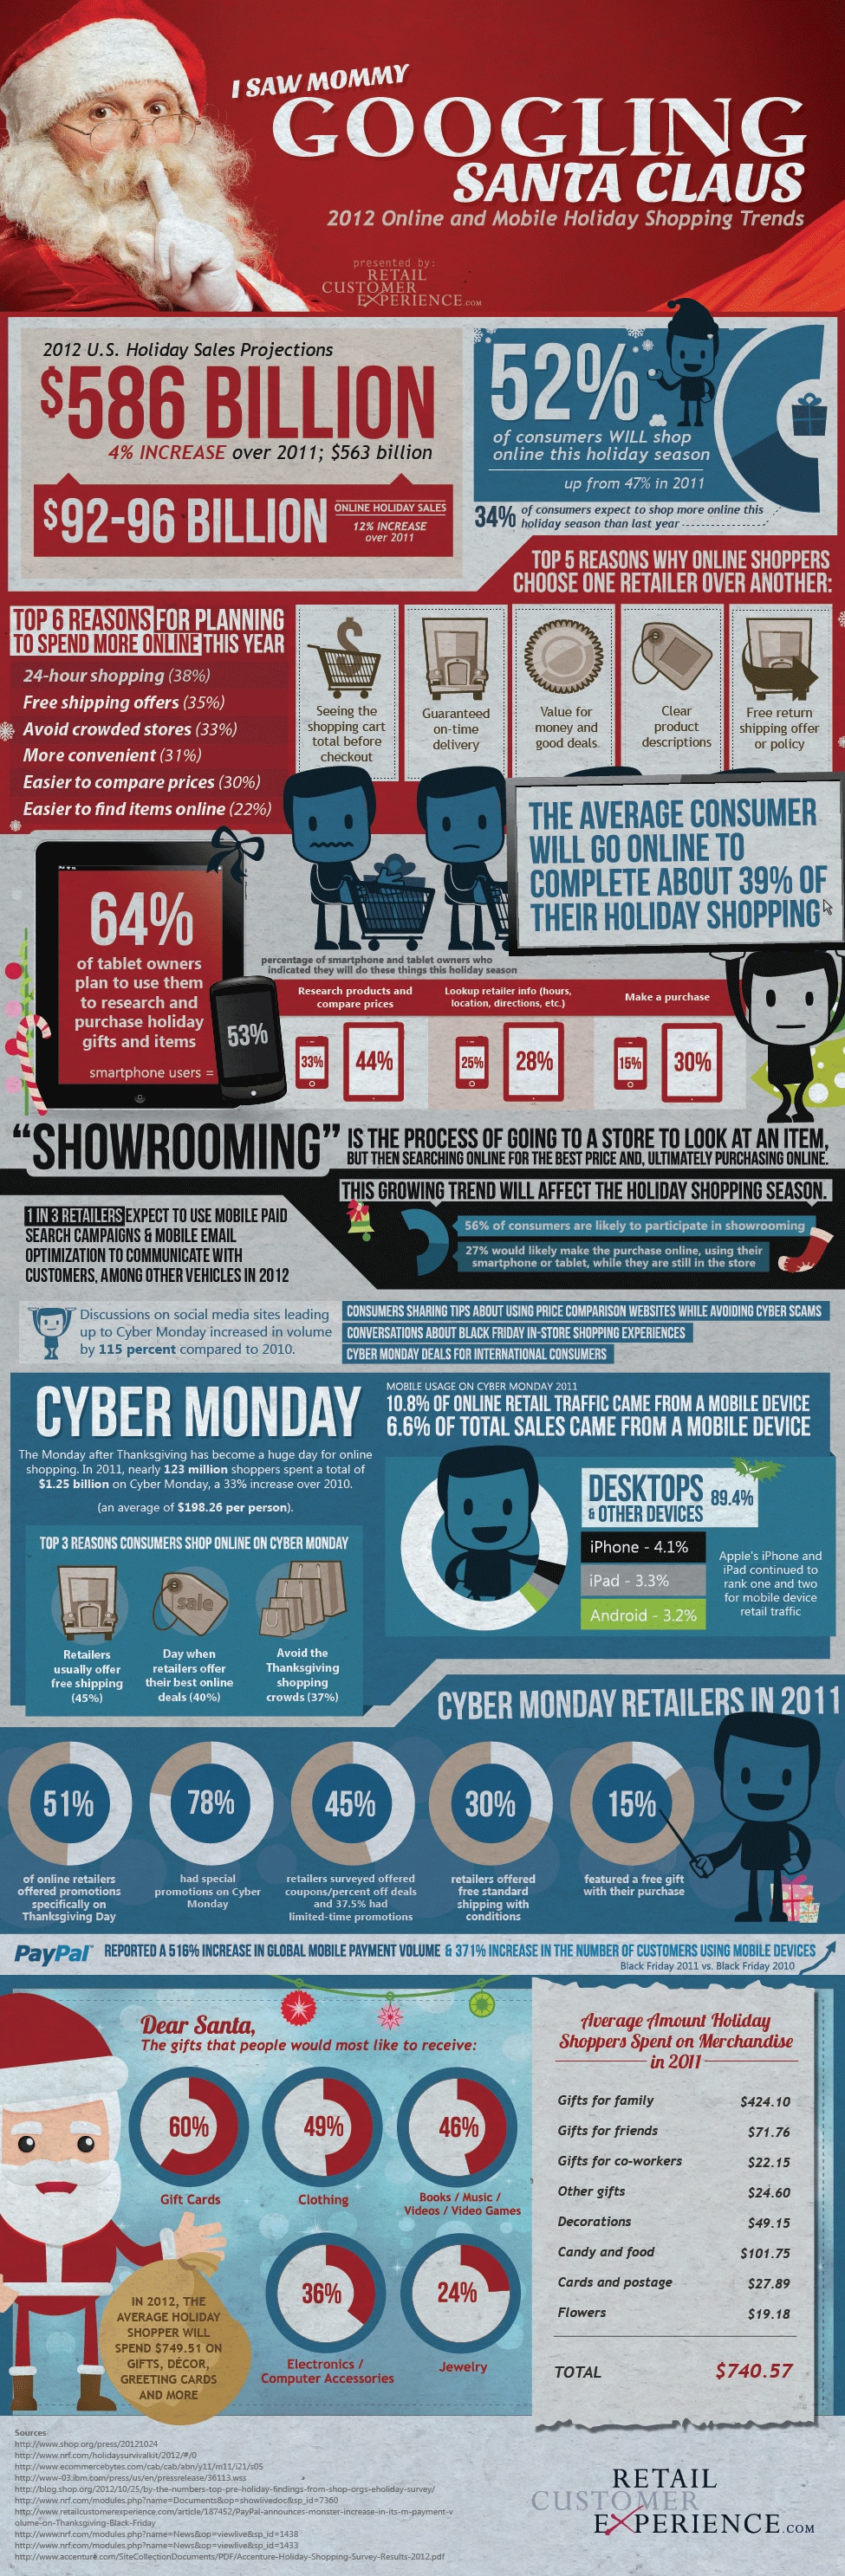 2012 Holiday Online & Mobile Shopping Trends [Infographic]